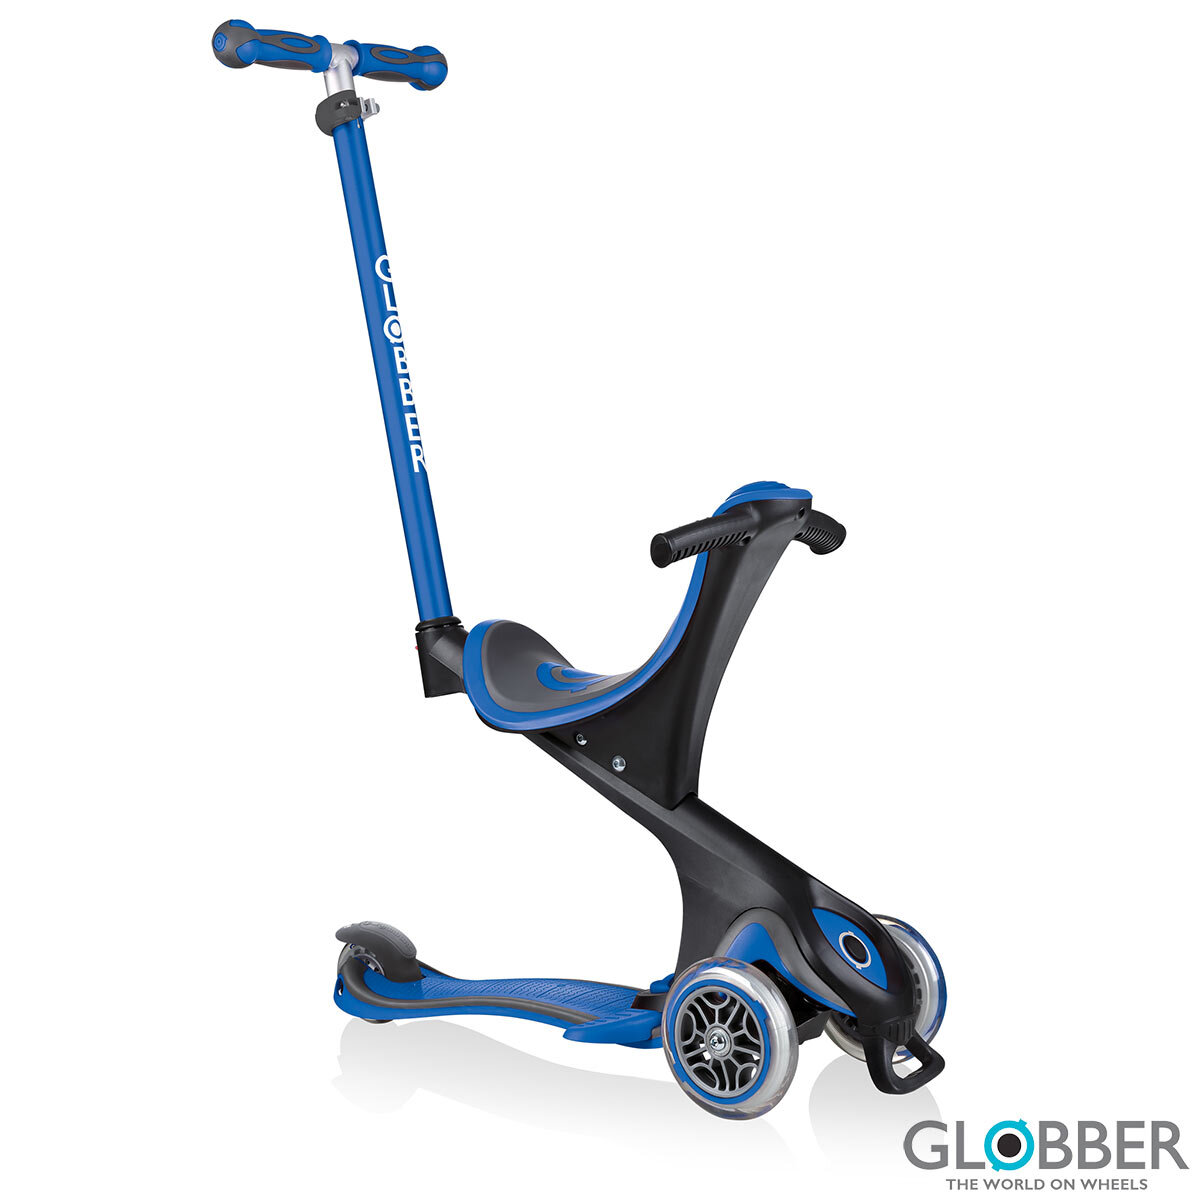 Buy Globber Go Up Comfort Scooter in Navy Step 1 Image at Costco.co.uk